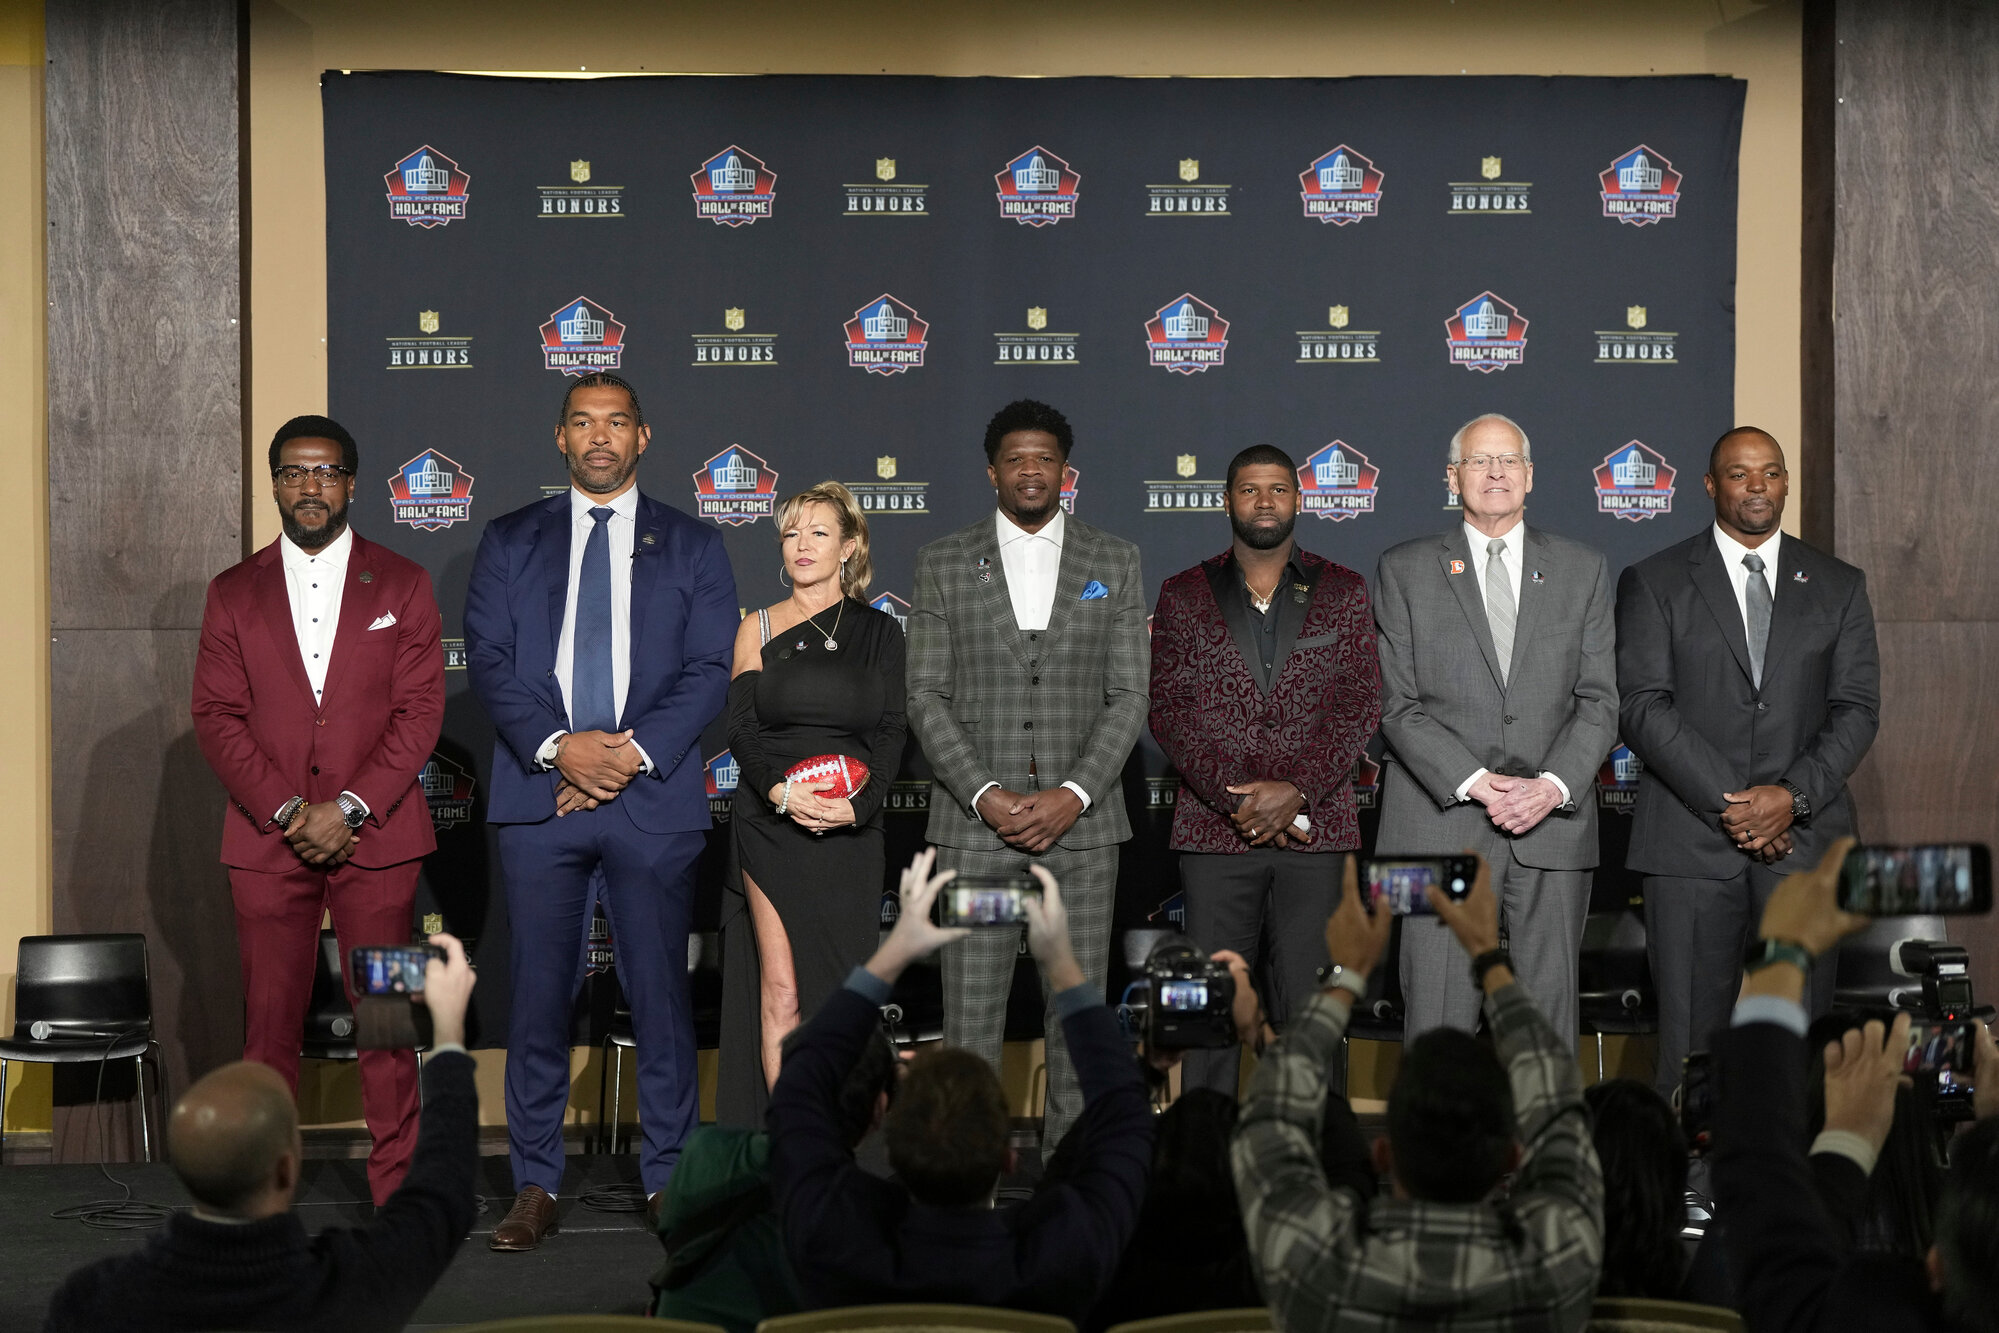 The NFL Hall of Fame Class of 2024 poses during a news conference at the NFL Honors award show ahead of Super Bowl 58 on Thursday in Las Vegas.